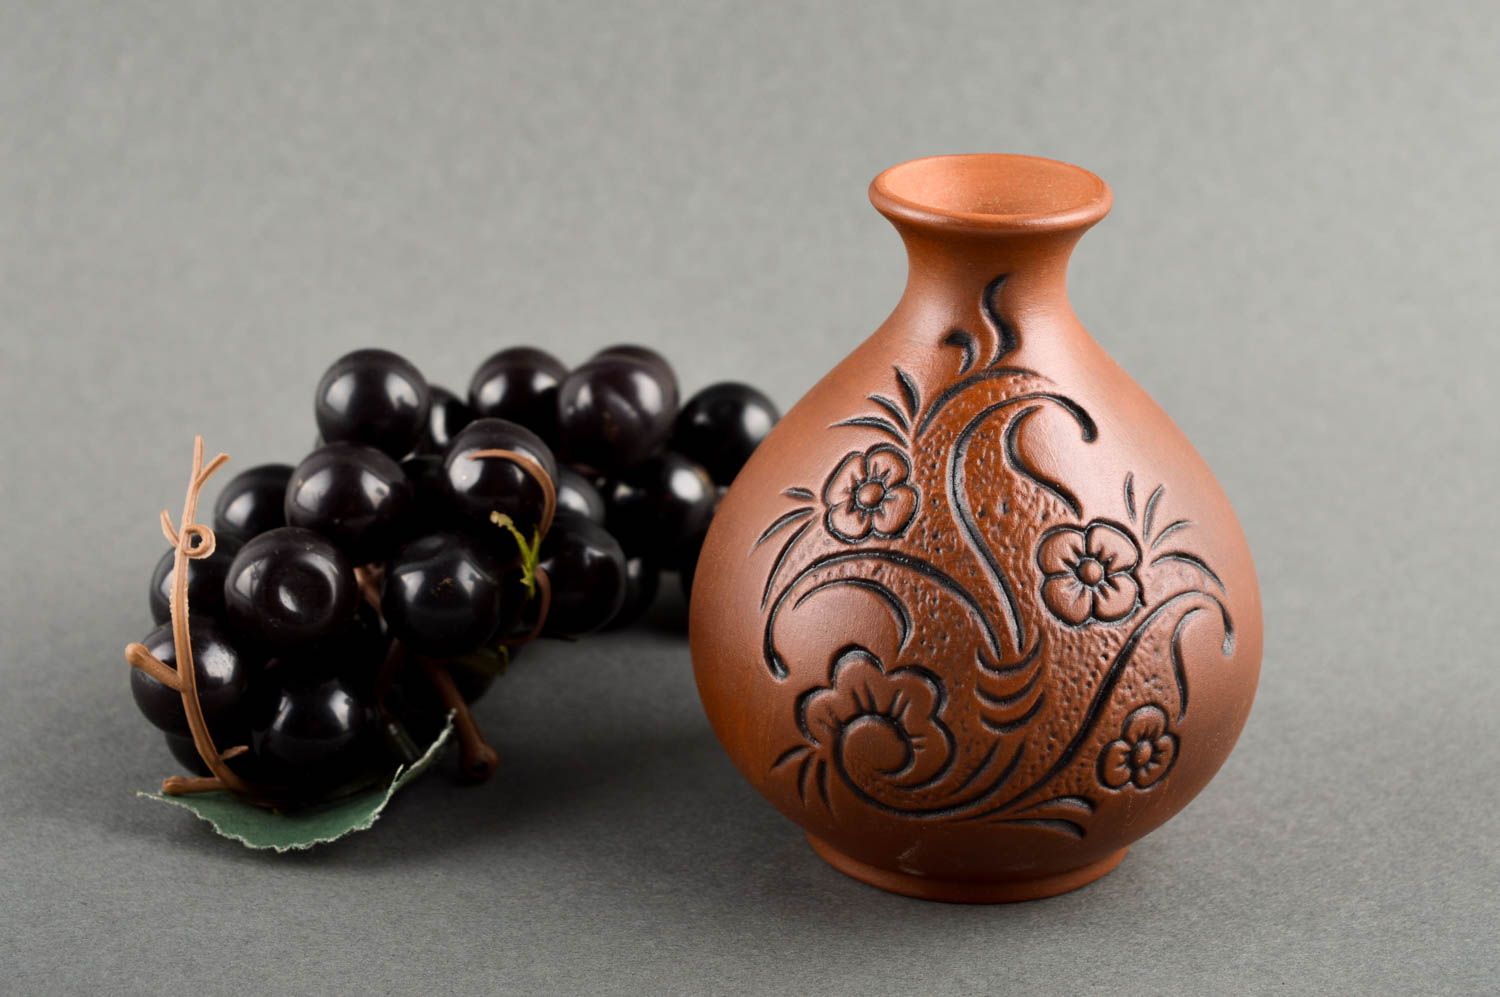 15 oz ceramic wine carafe with hand carvings in floral design 0,3 lb photo 1